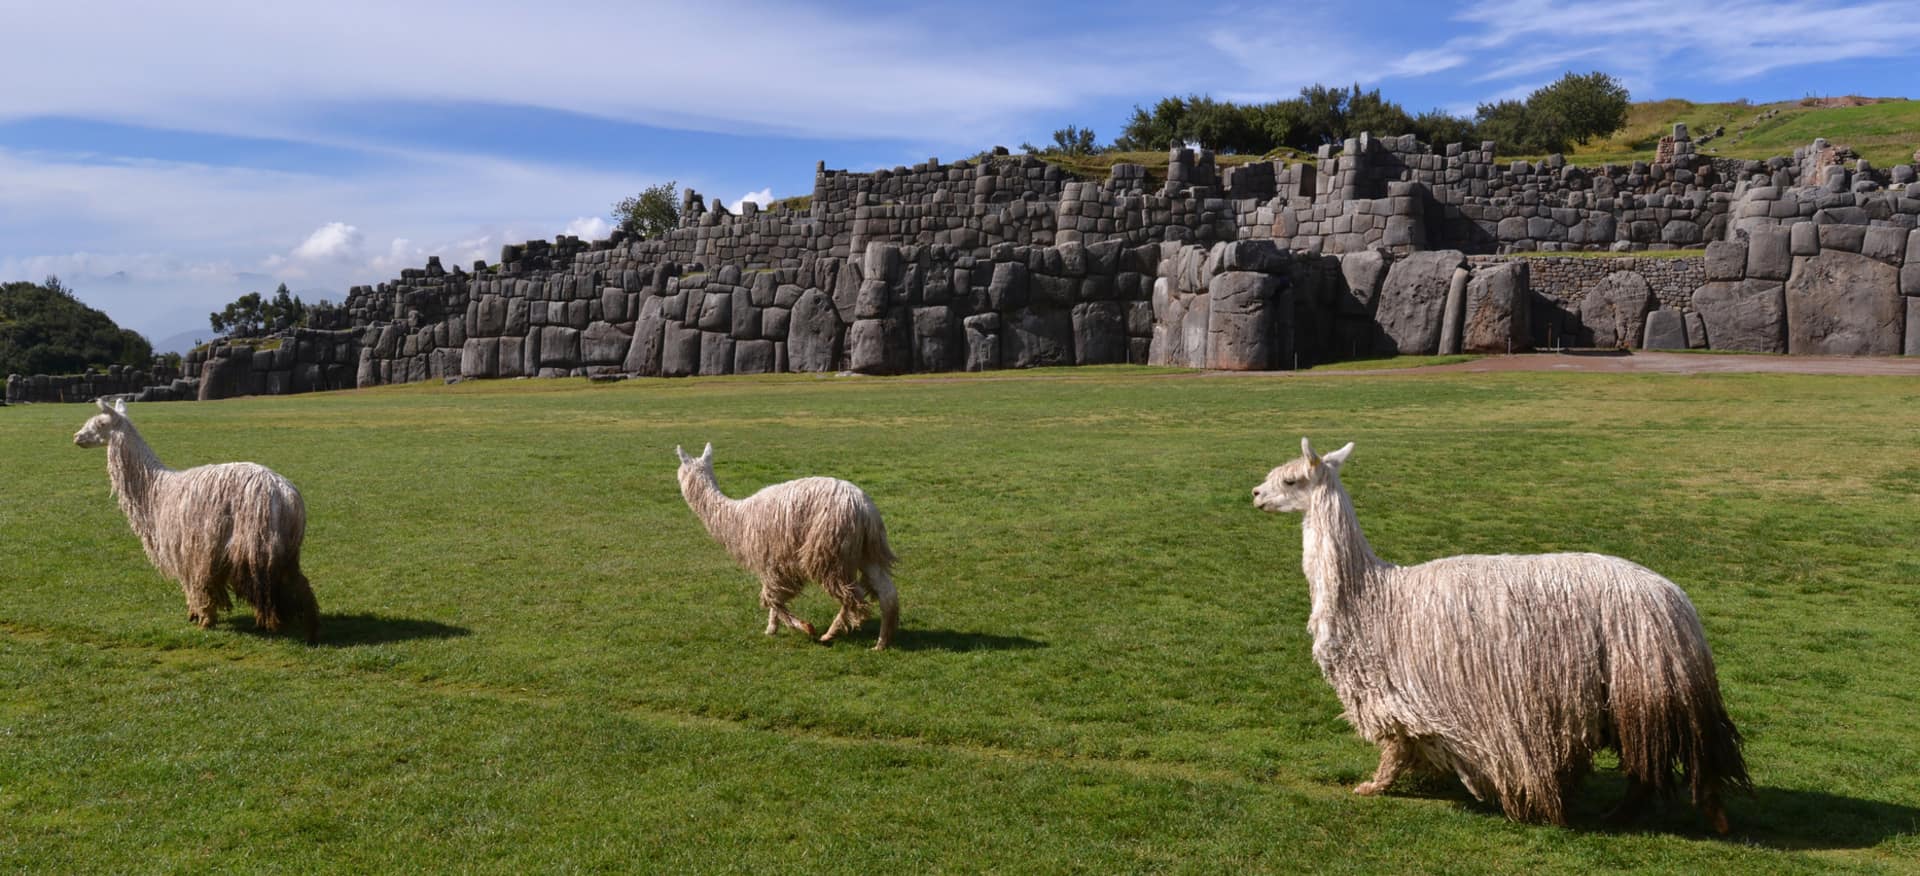 Llamas at Sacsayhuaman - Things to do in Cusco and around